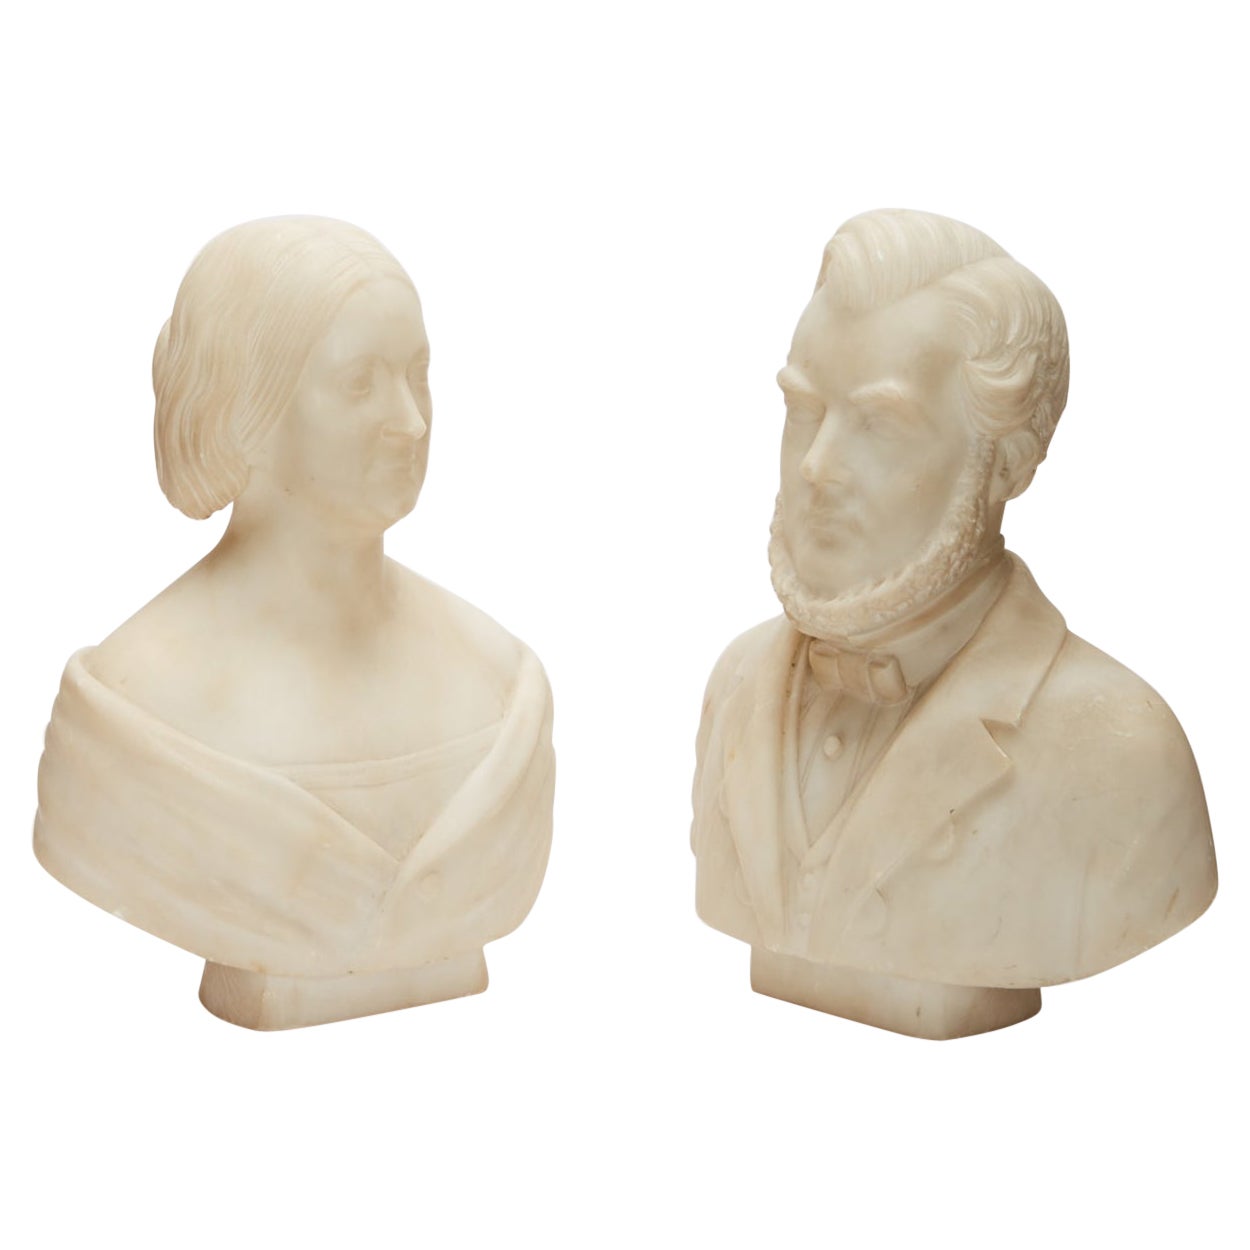 Pair of Marble Portrait Busts of Male and Female 19th Century American